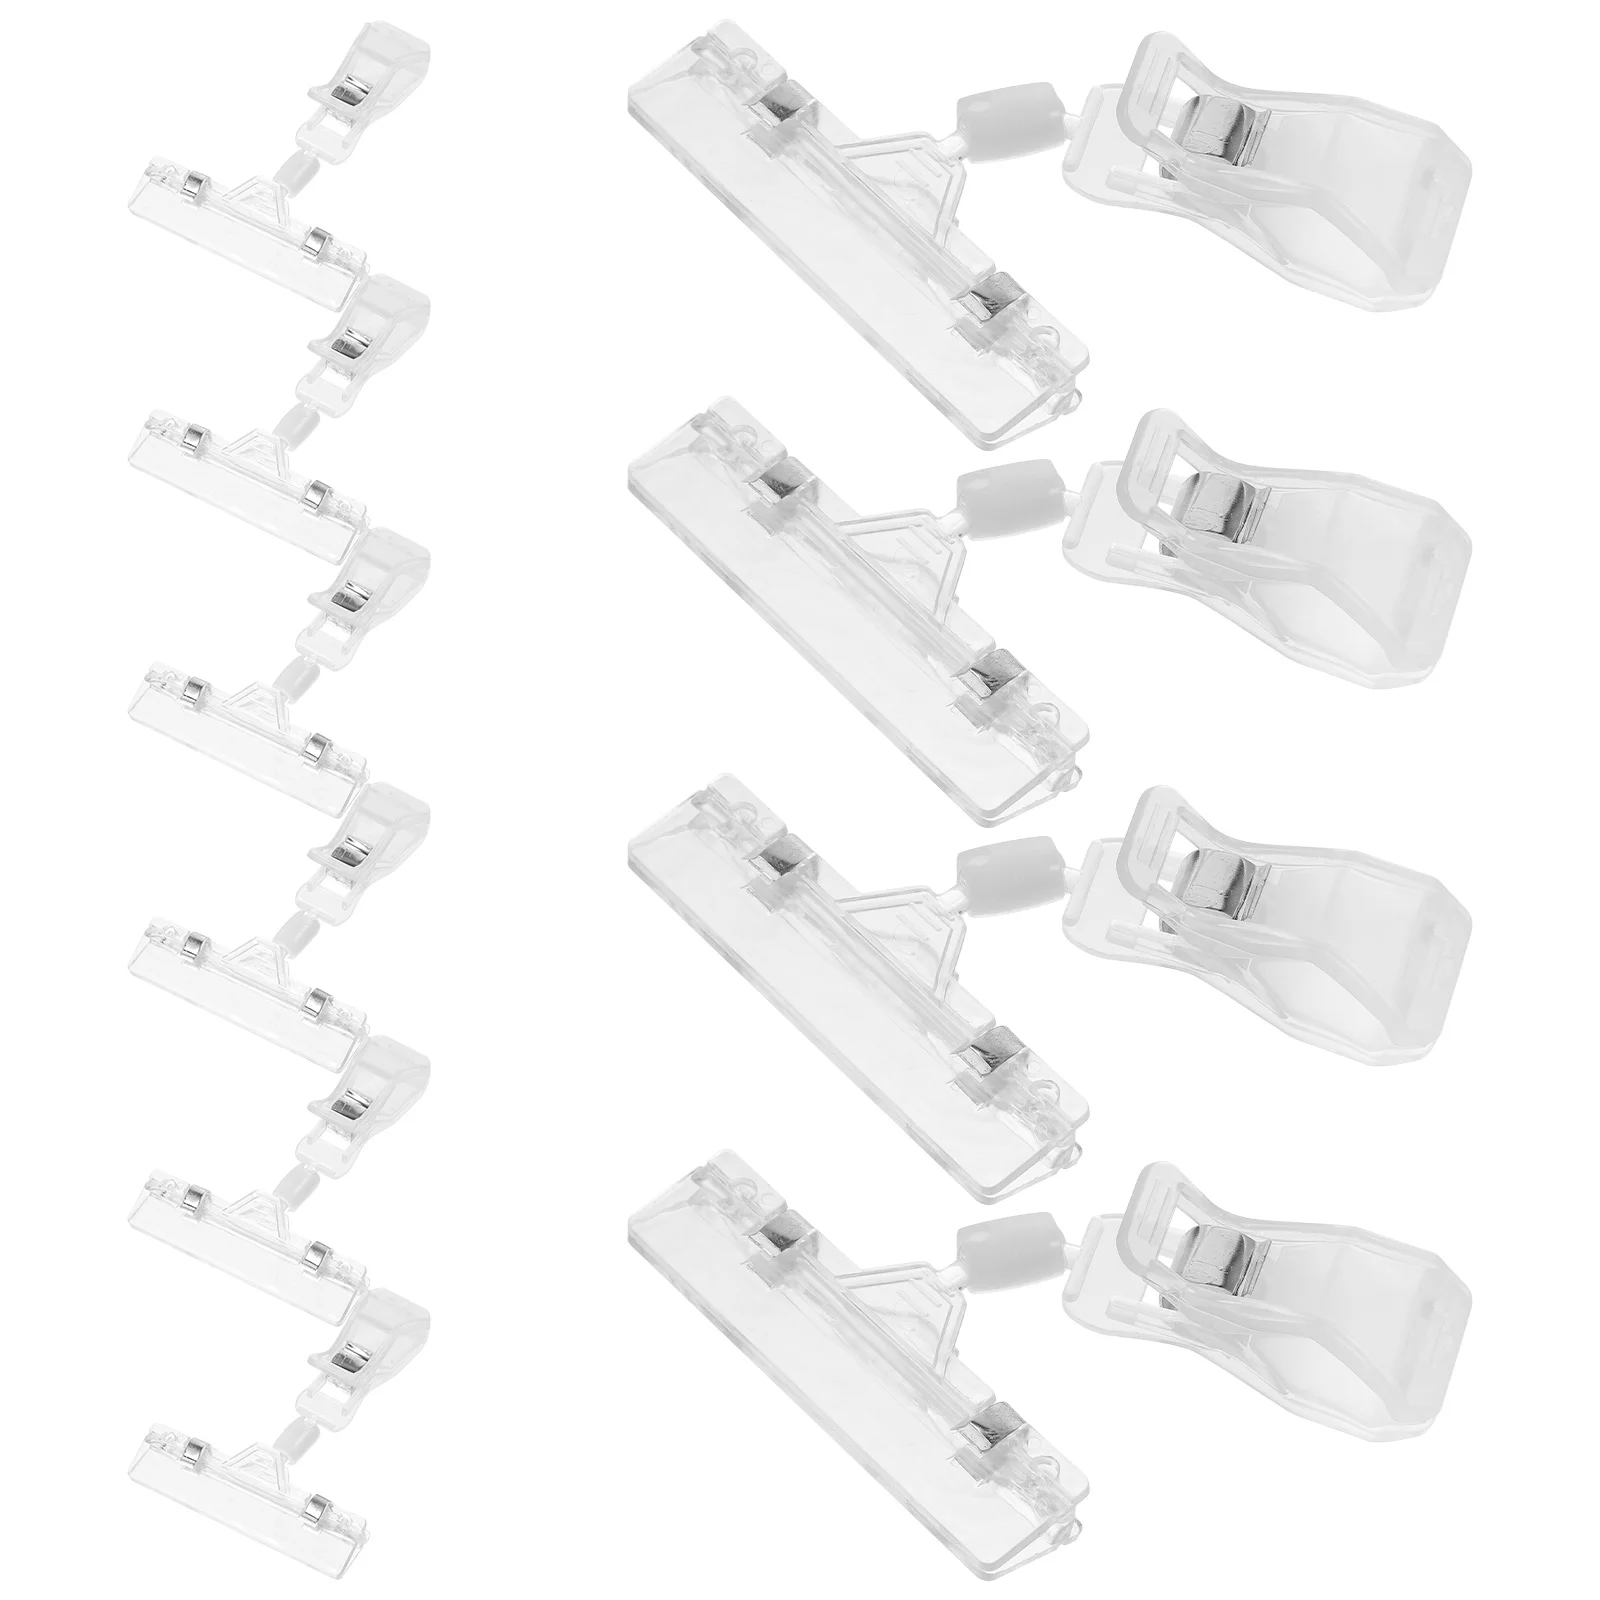 

Sign Holder Display Tag Clip Clips Merchandise Holders Rack Store Clothing Clear Onmerchandise Tags Advertising Table Stand